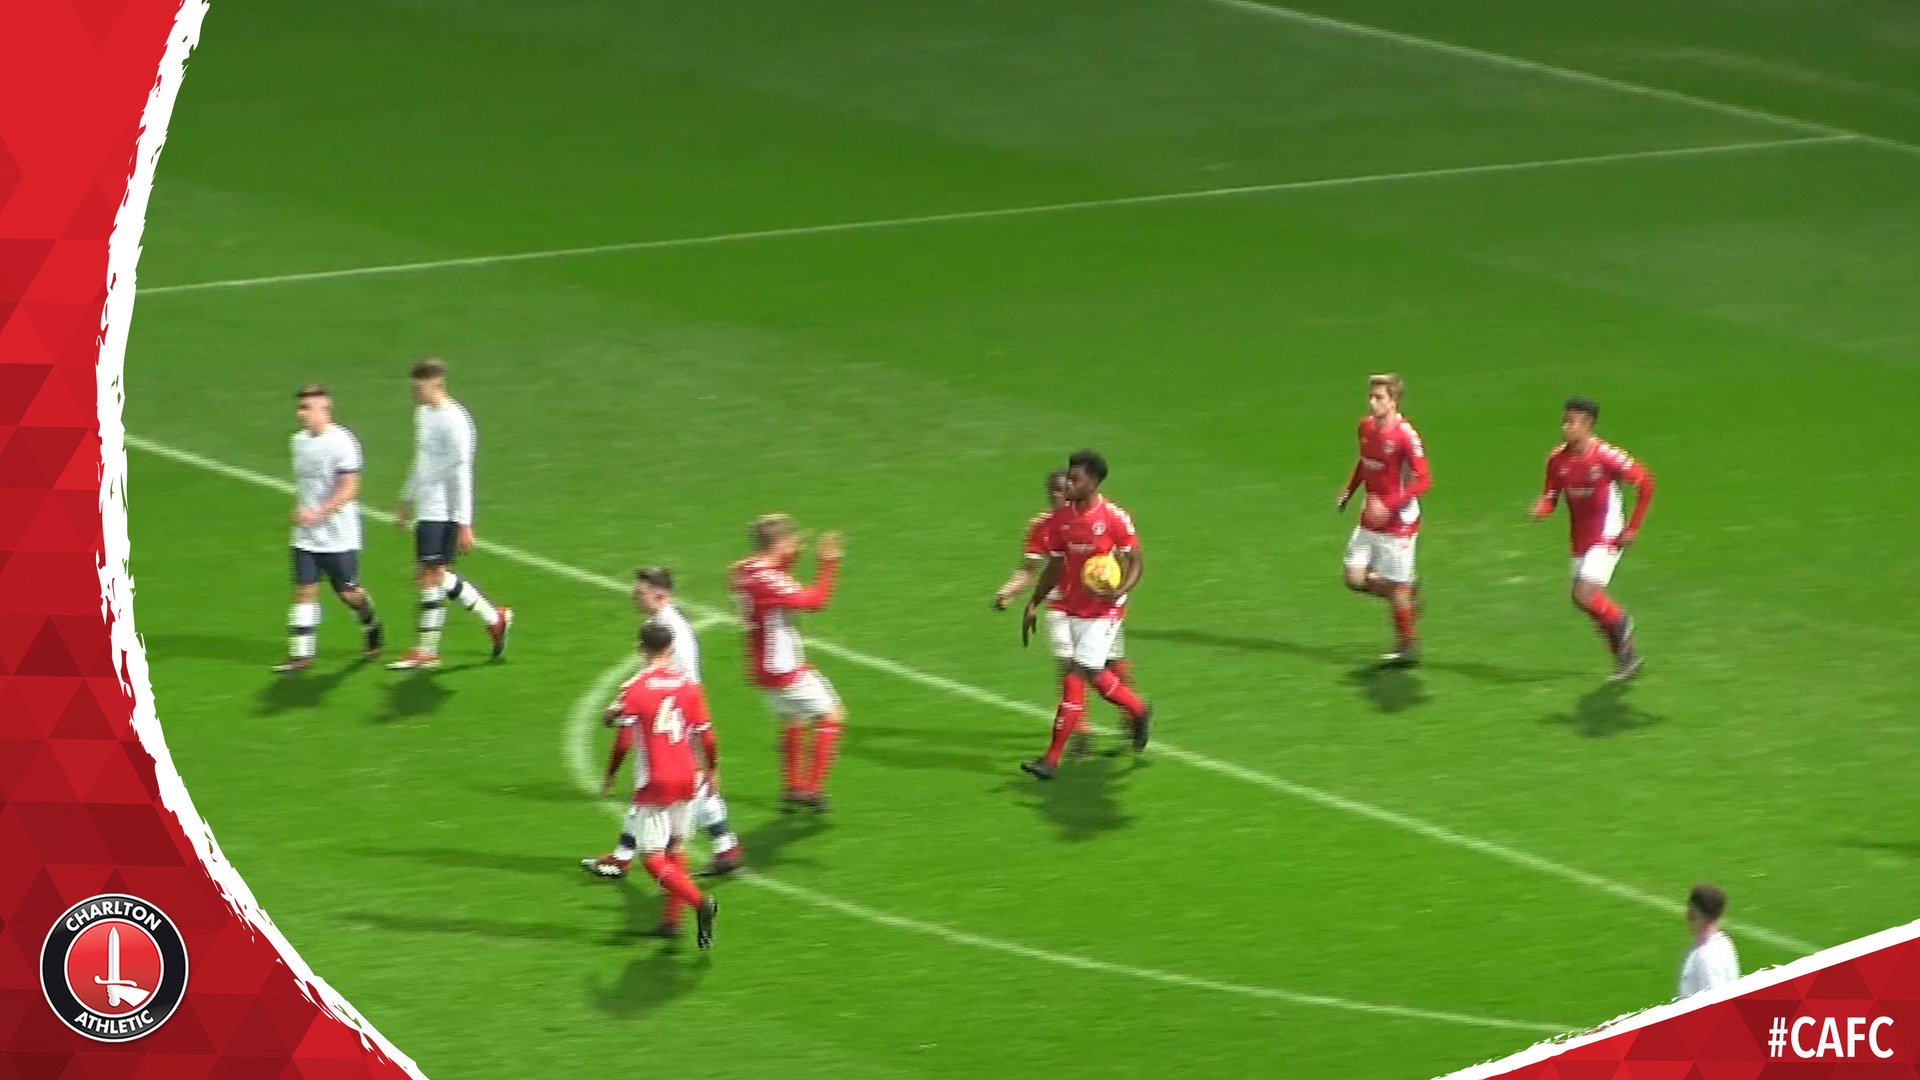 FA YOUTH CUP HIGHLIGHTS | Preston North End 2 Charlton 2 (3-1 on pens)